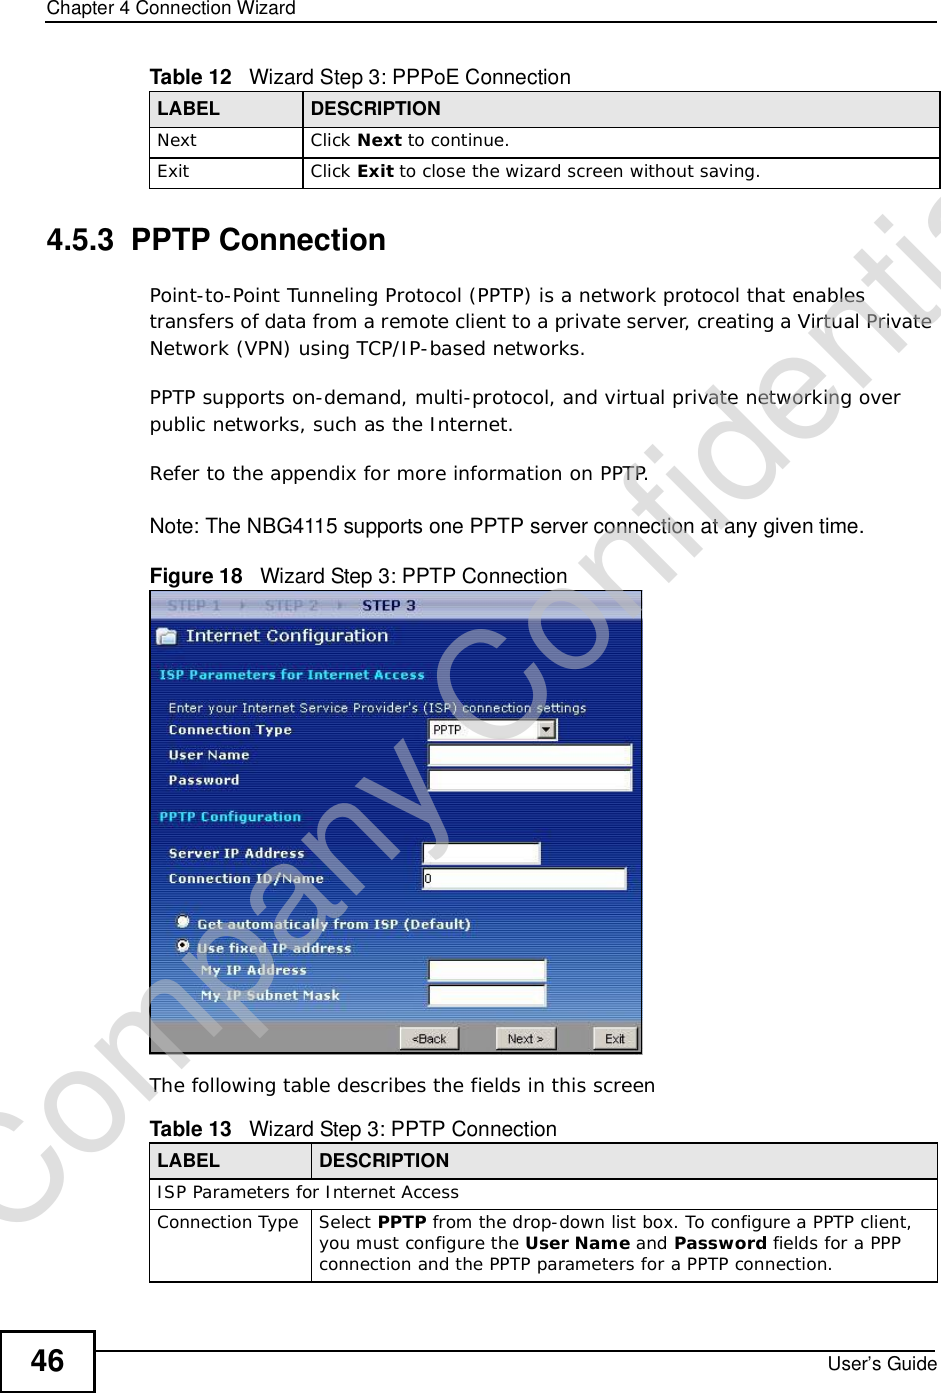 Chapter 4Connection WizardUser’s Guide464.5.3  PPTP ConnectionPoint-to-Point Tunneling Protocol (PPTP) is a network protocol that enables transfers of data from a remote client to a private server, creating a Virtual Private Network (VPN) using TCP/IP-based networks.PPTP supports on-demand, multi-protocol, and virtual private networking over public networks, such as the Internet.Refer to the appendix for more information on PPTP.Note: The NBG4115 supports one PPTP server connection at any given time.Figure 18   Wizard Step 3: PPTP ConnectionThe following table describes the fields in this screenNext Click Next to continue. Exit Click Exit to close the wizard screen without saving.Table 12   Wizard Step 3: PPPoE ConnectionLABEL DESCRIPTIONTable 13   Wizard Step 3: PPTP ConnectionLABEL DESCRIPTIONISP Parameters for Internet AccessConnection TypeSelect PPTP from the drop-down list box. To configure a PPTP client, you must configure the User Name and Password fields for a PPP connection and the PPTP parameters for a PPTP connection.Company Confidential